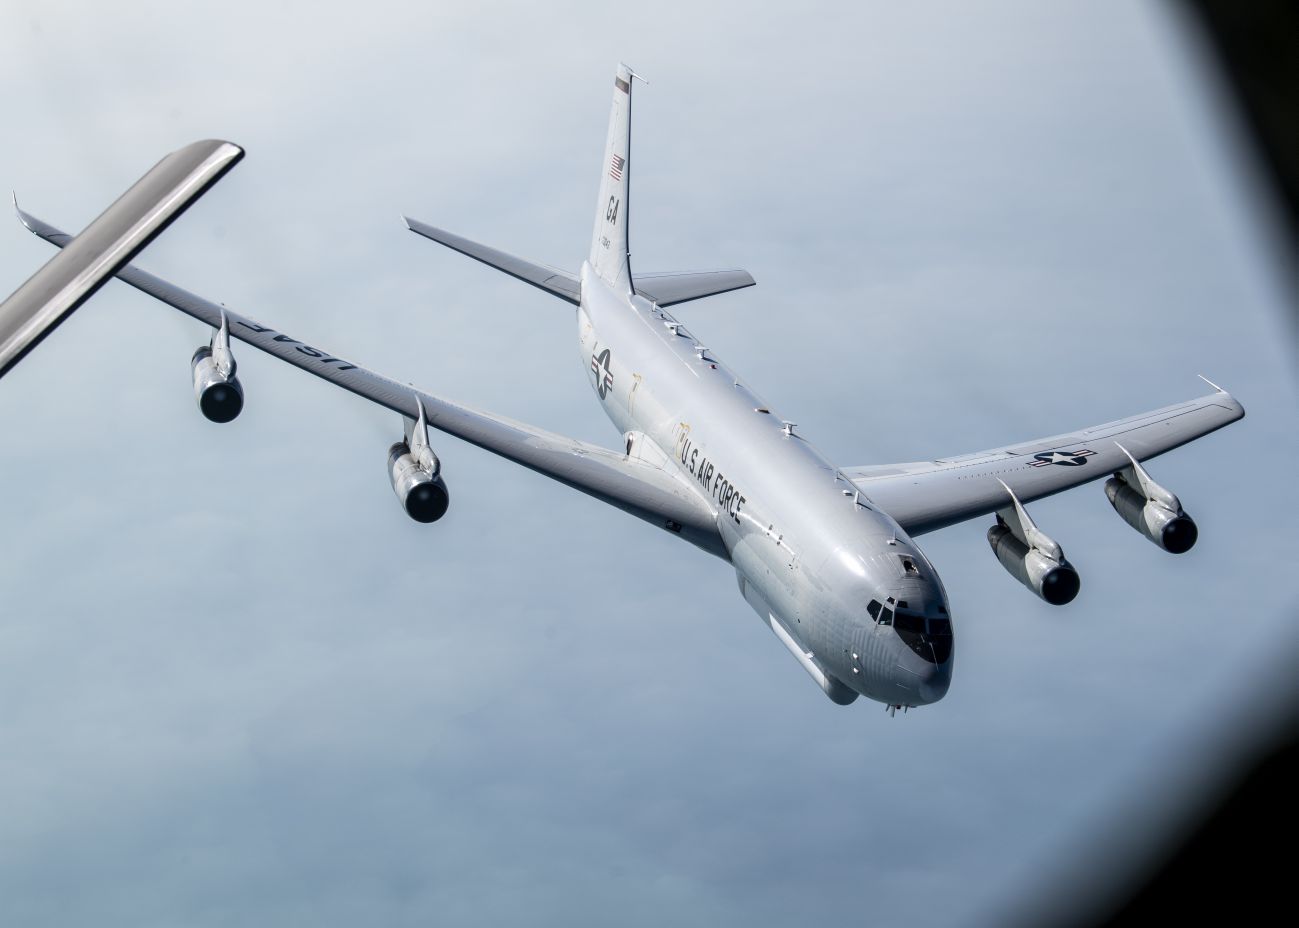 An E-8C JSTARS aircraft pictured on 5 October 2020. US lawmakers have made it more difficult for the USAF to retire JSTARS platforms. (US Air Force)